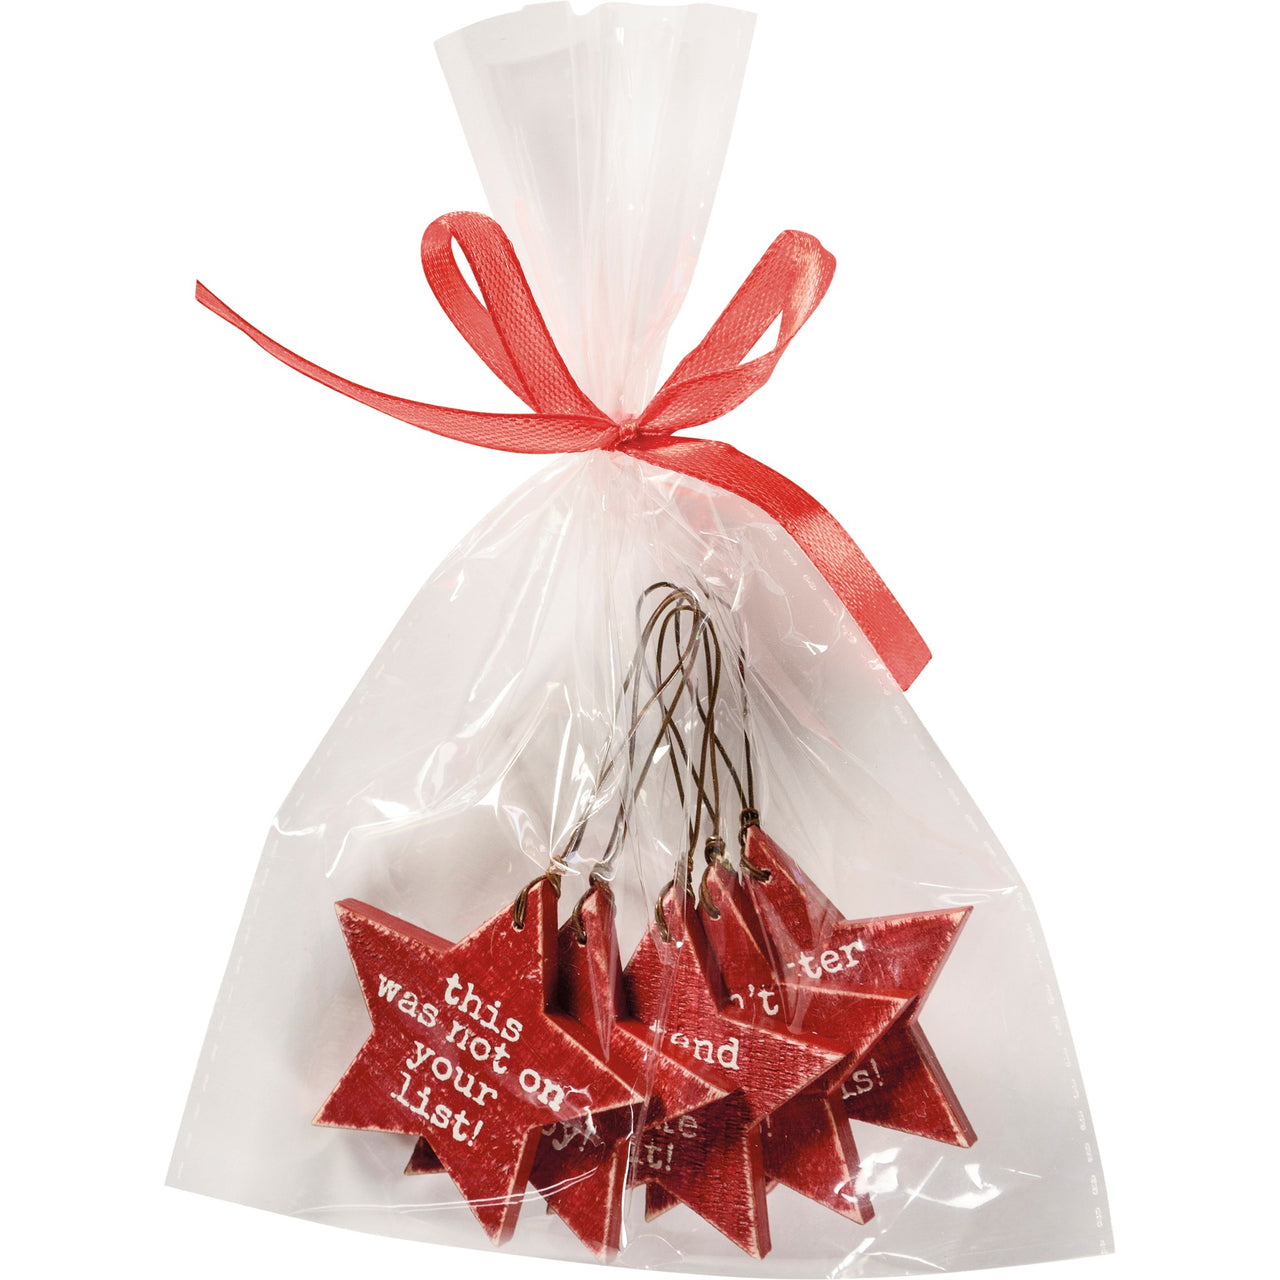 Gift Tag Set - Not on Your